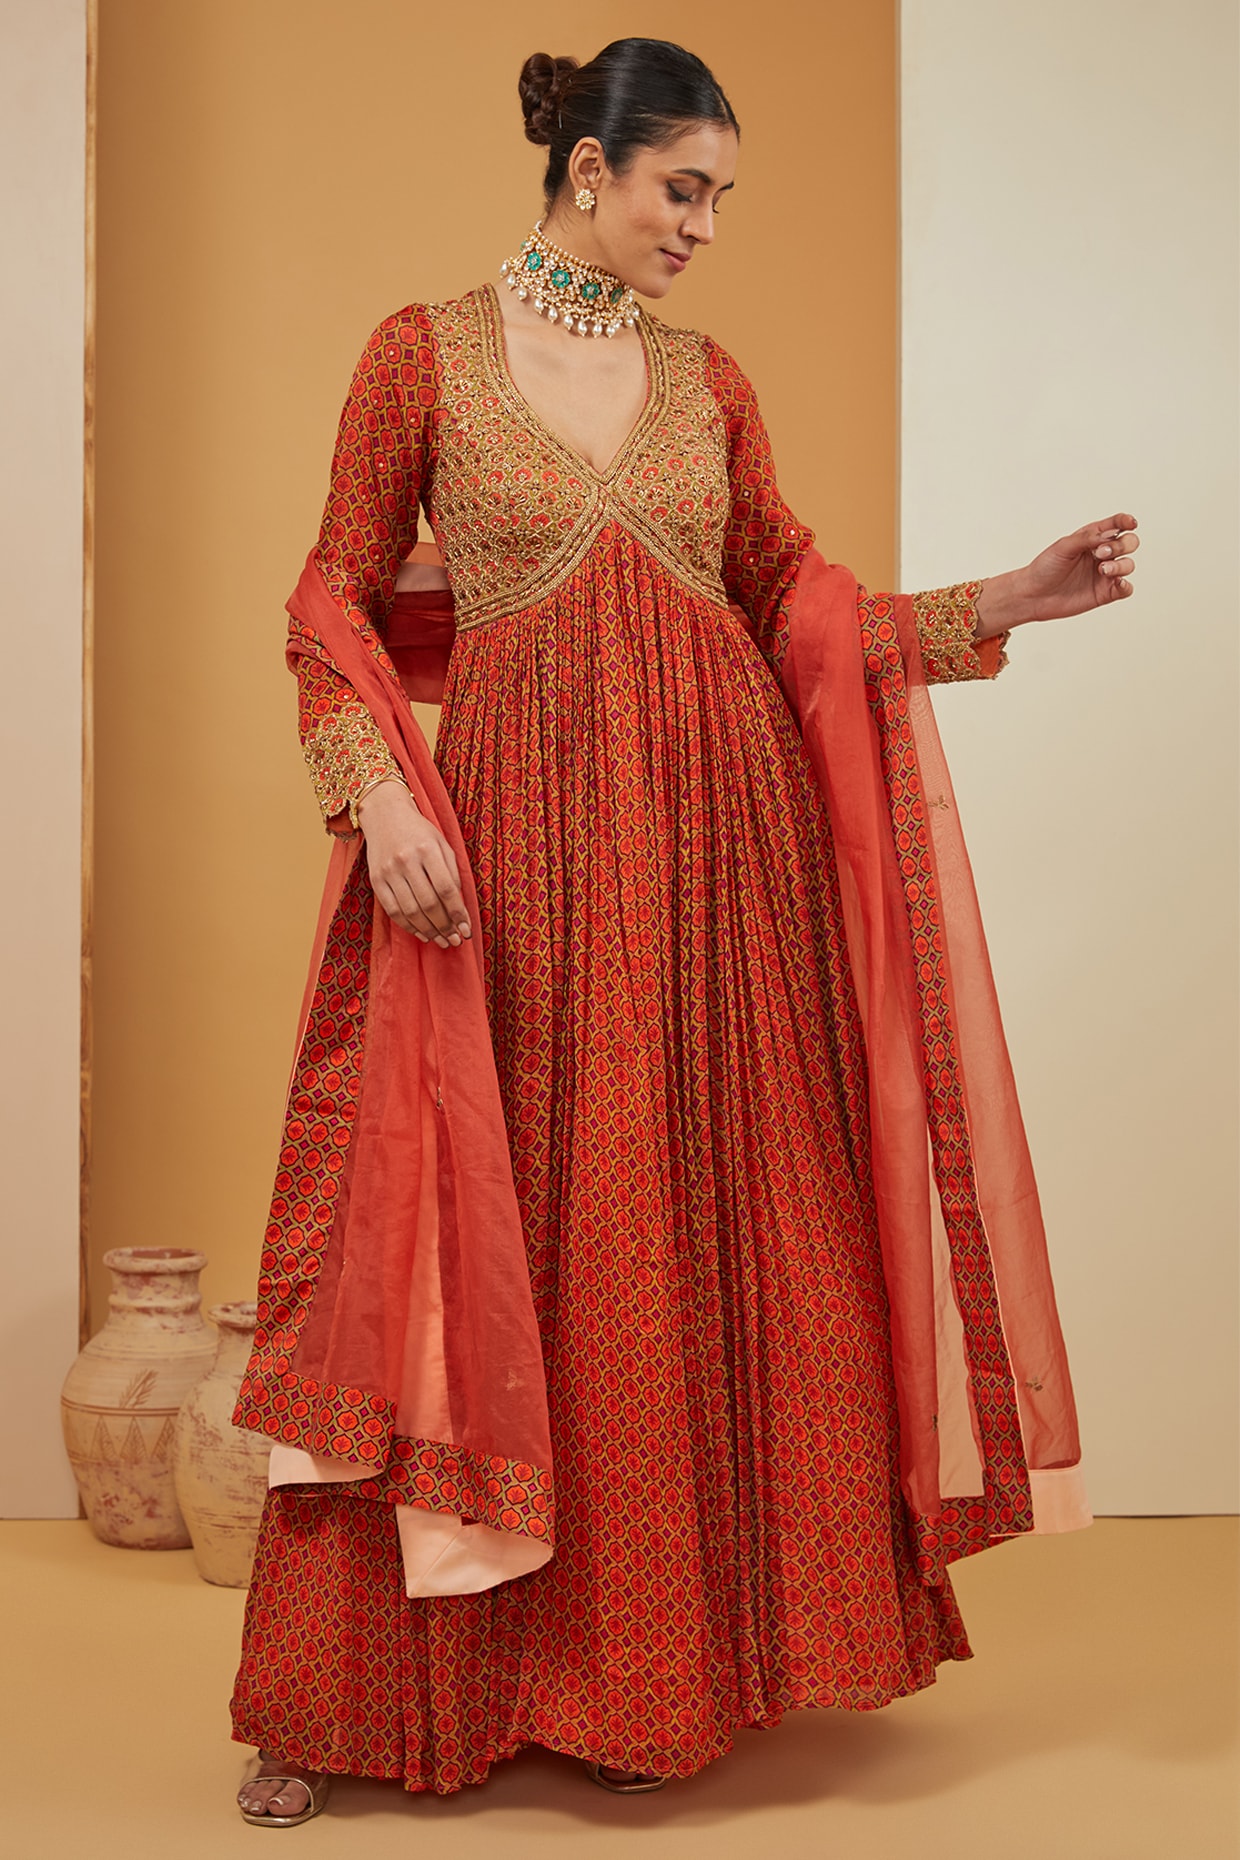 Buy Readymade Anarkali Suits Online at IndianClothStore.com